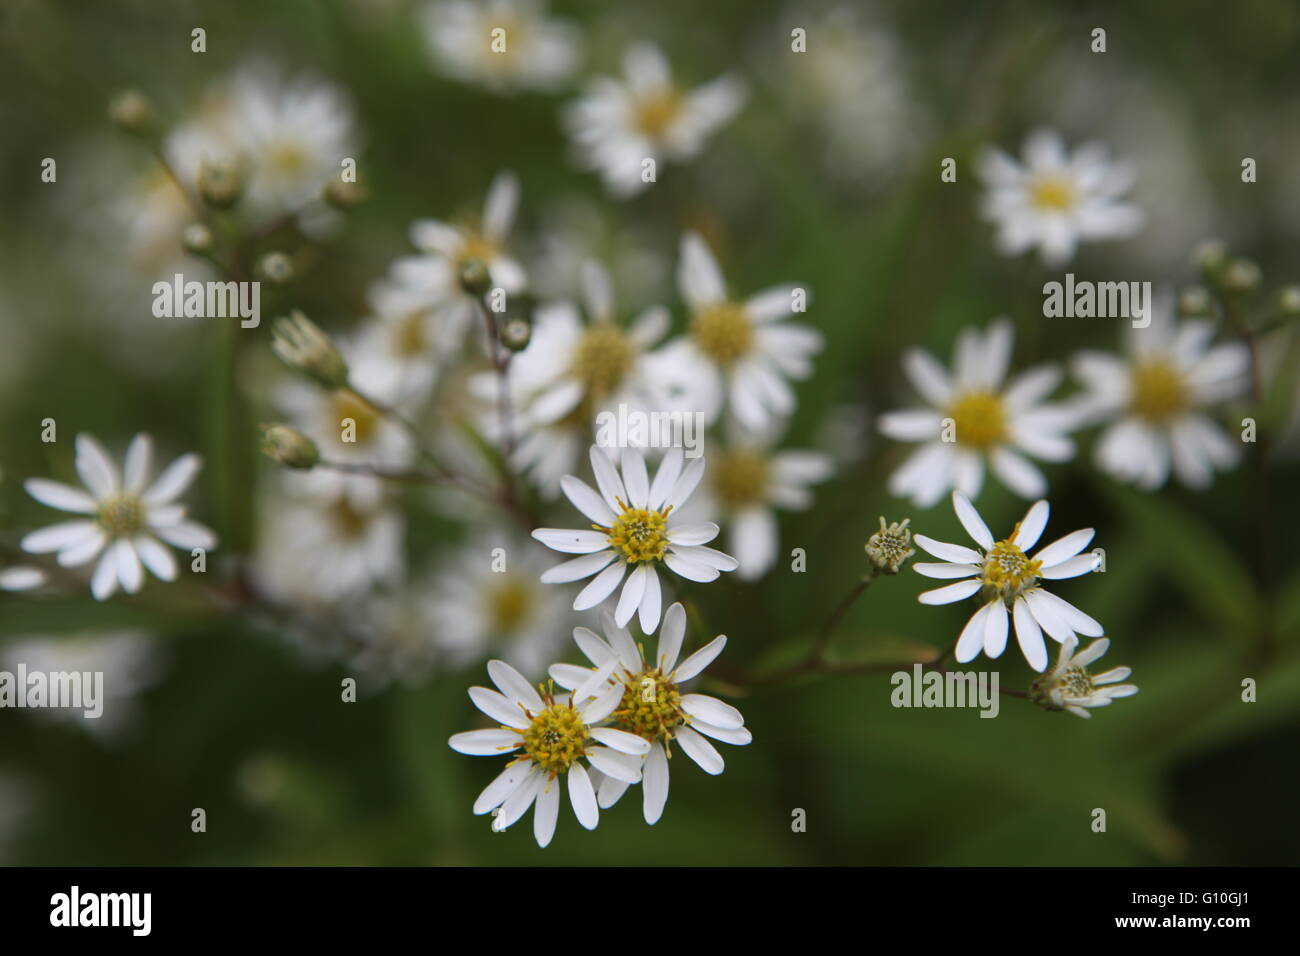 Delicate, little white and yellow daisies in the National Park, Glenveagh, Churchill, Letterkenny,, Co. Donegal Stock Photo